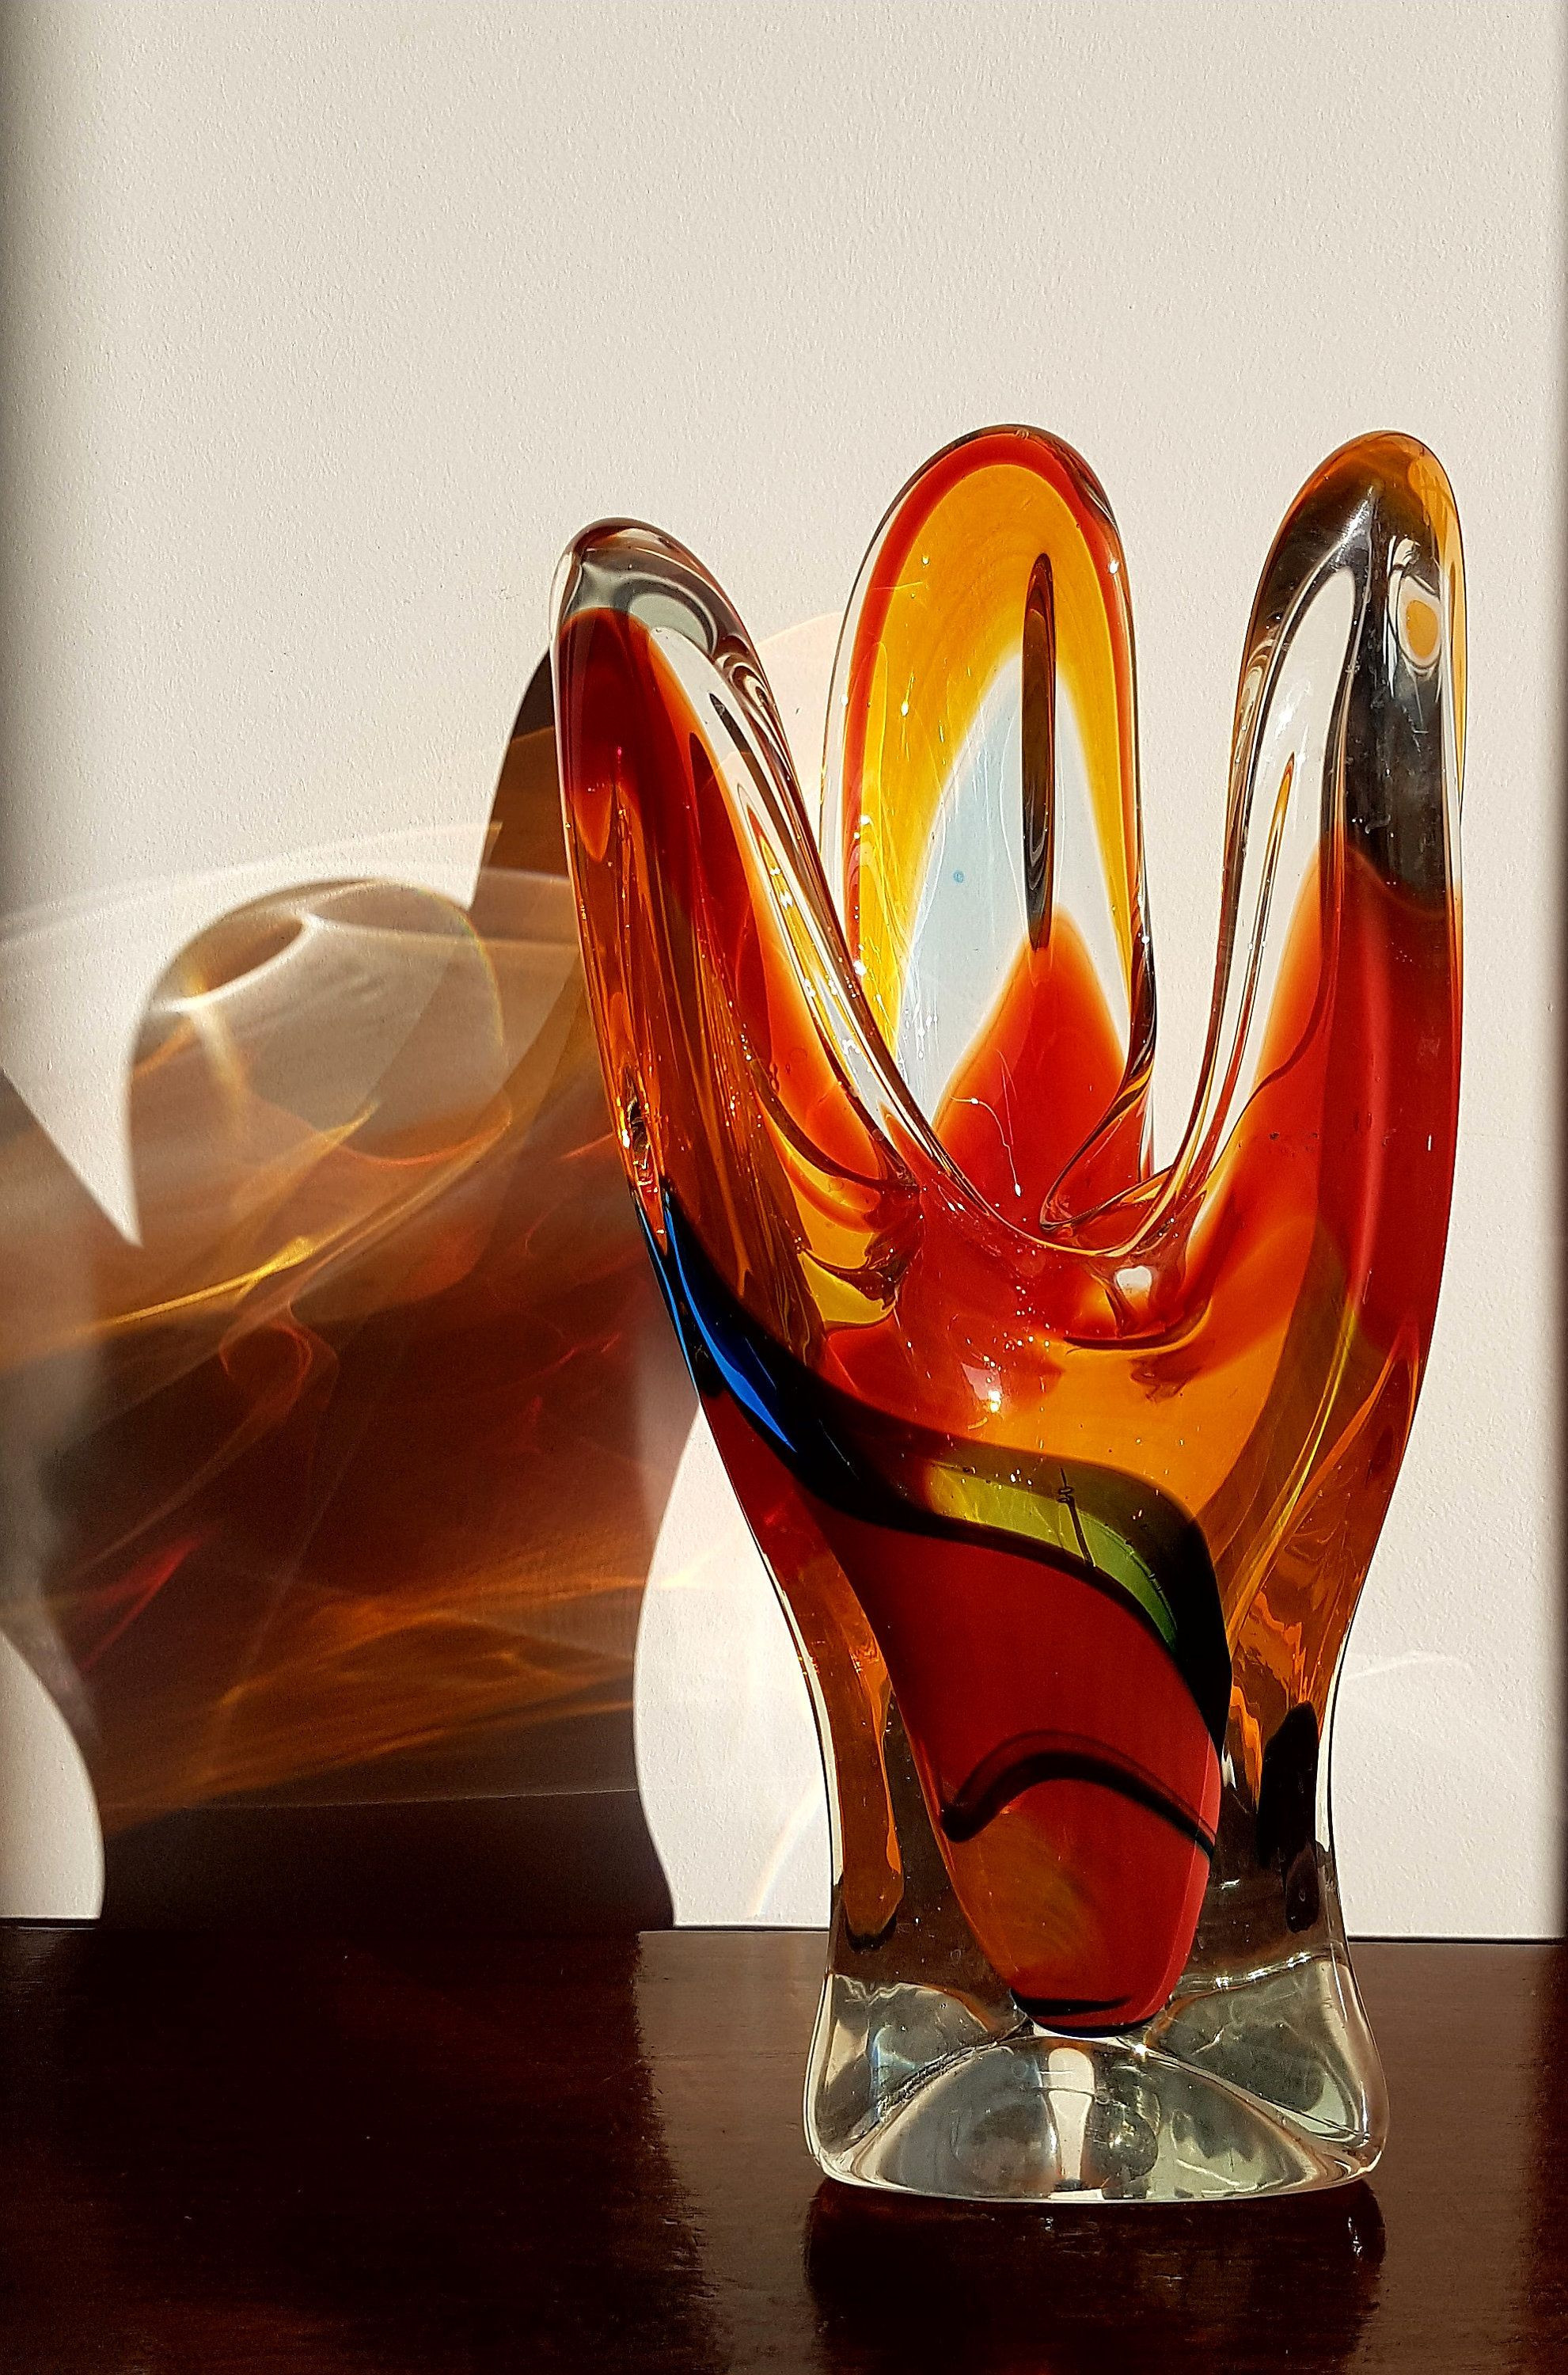 21 Awesome Vintage Glass Vases for Sale 2024 free download vintage glass vases for sale of pin by steven wolff on transparent glass sculptures in 2018 with regard to pin by steven wolff on transparent glass sculptures in 2018 pinterest vintage japan